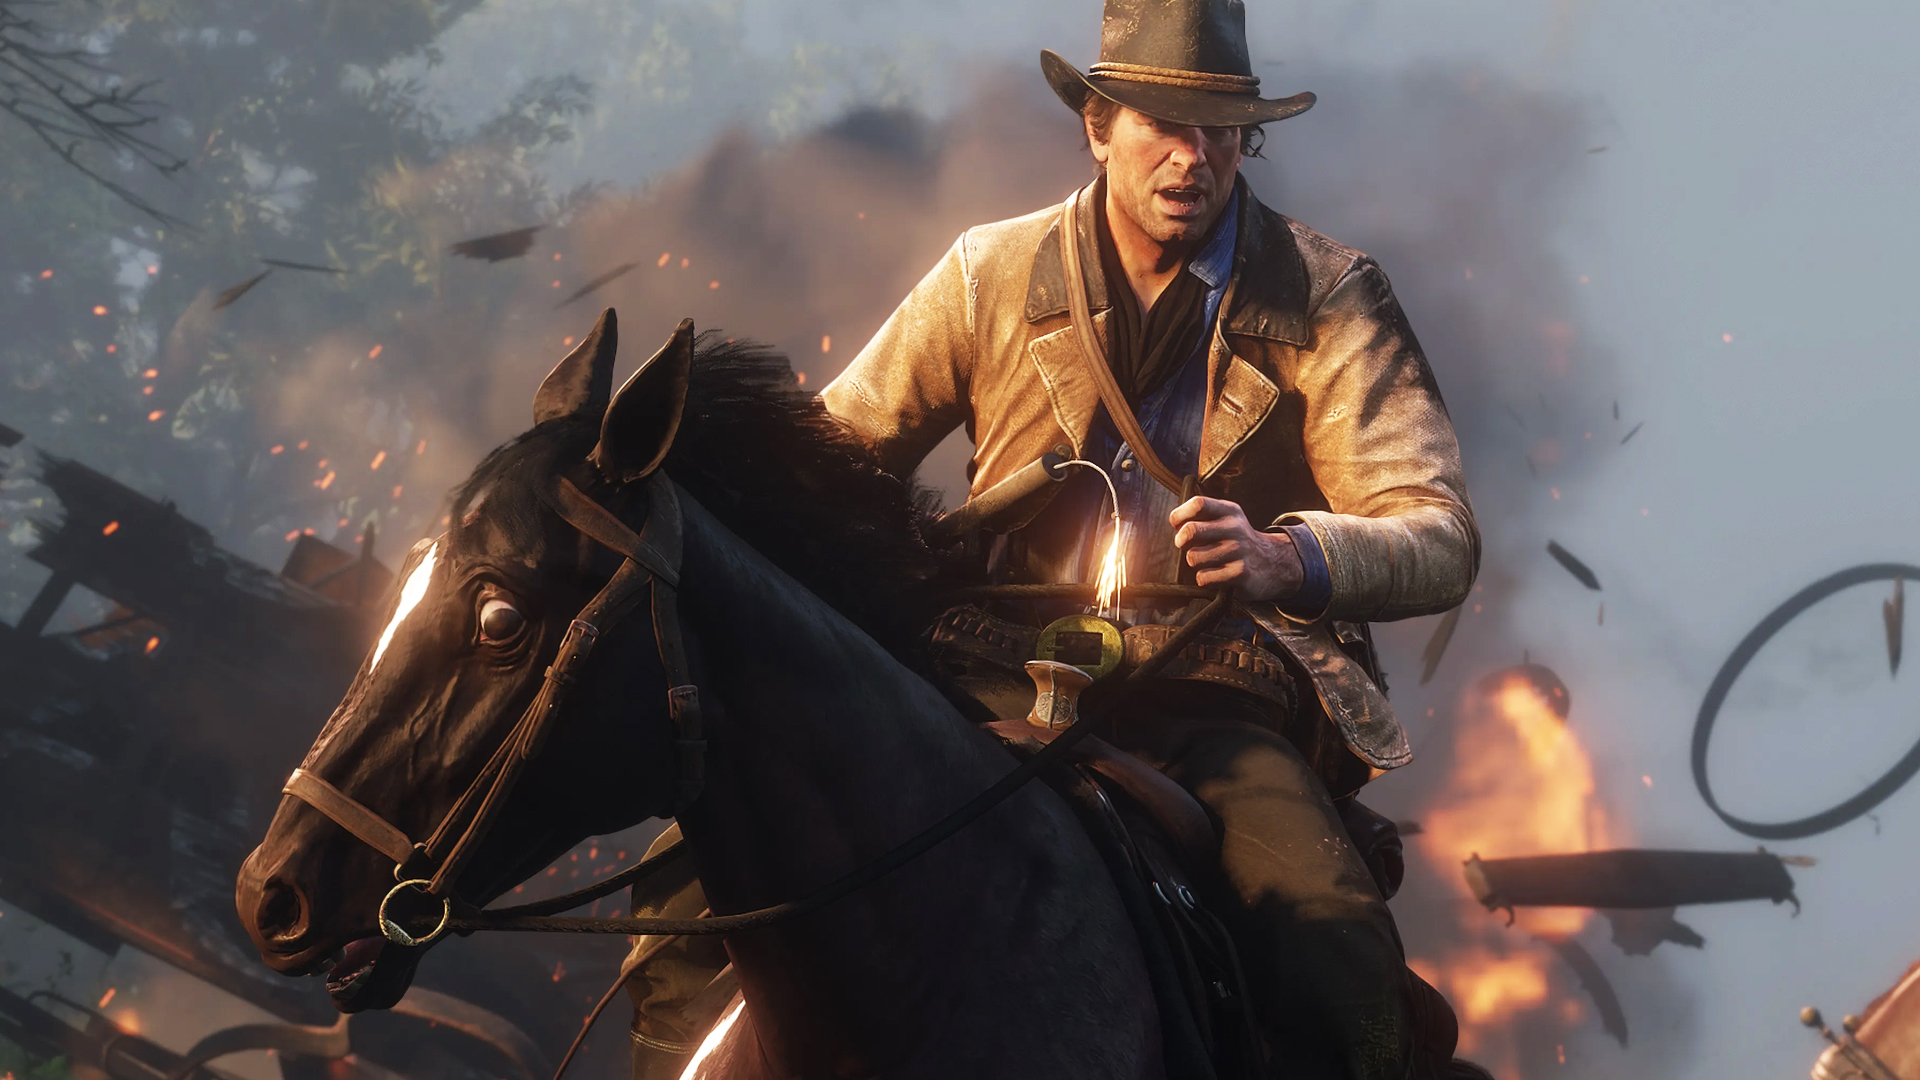 Excitement Peaks as GTA VI Merges Best of Red Dead Redemption 2: Fans Buzz Over Upcoming Features